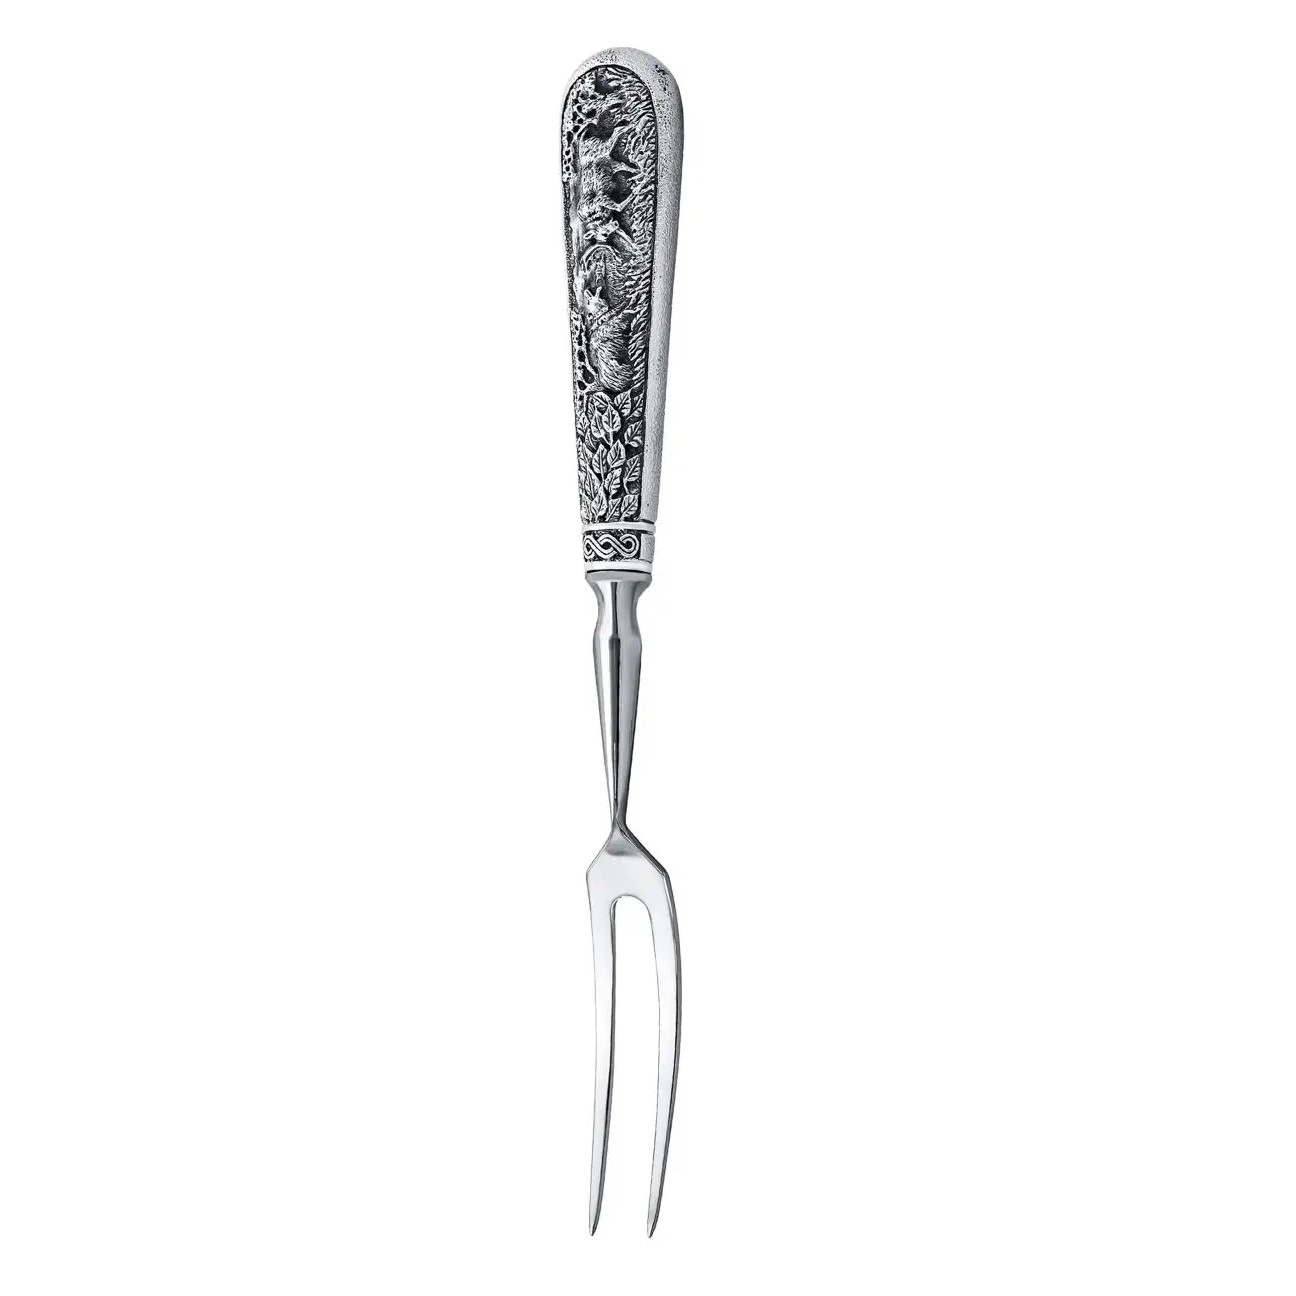 Nickel silver forks for meat